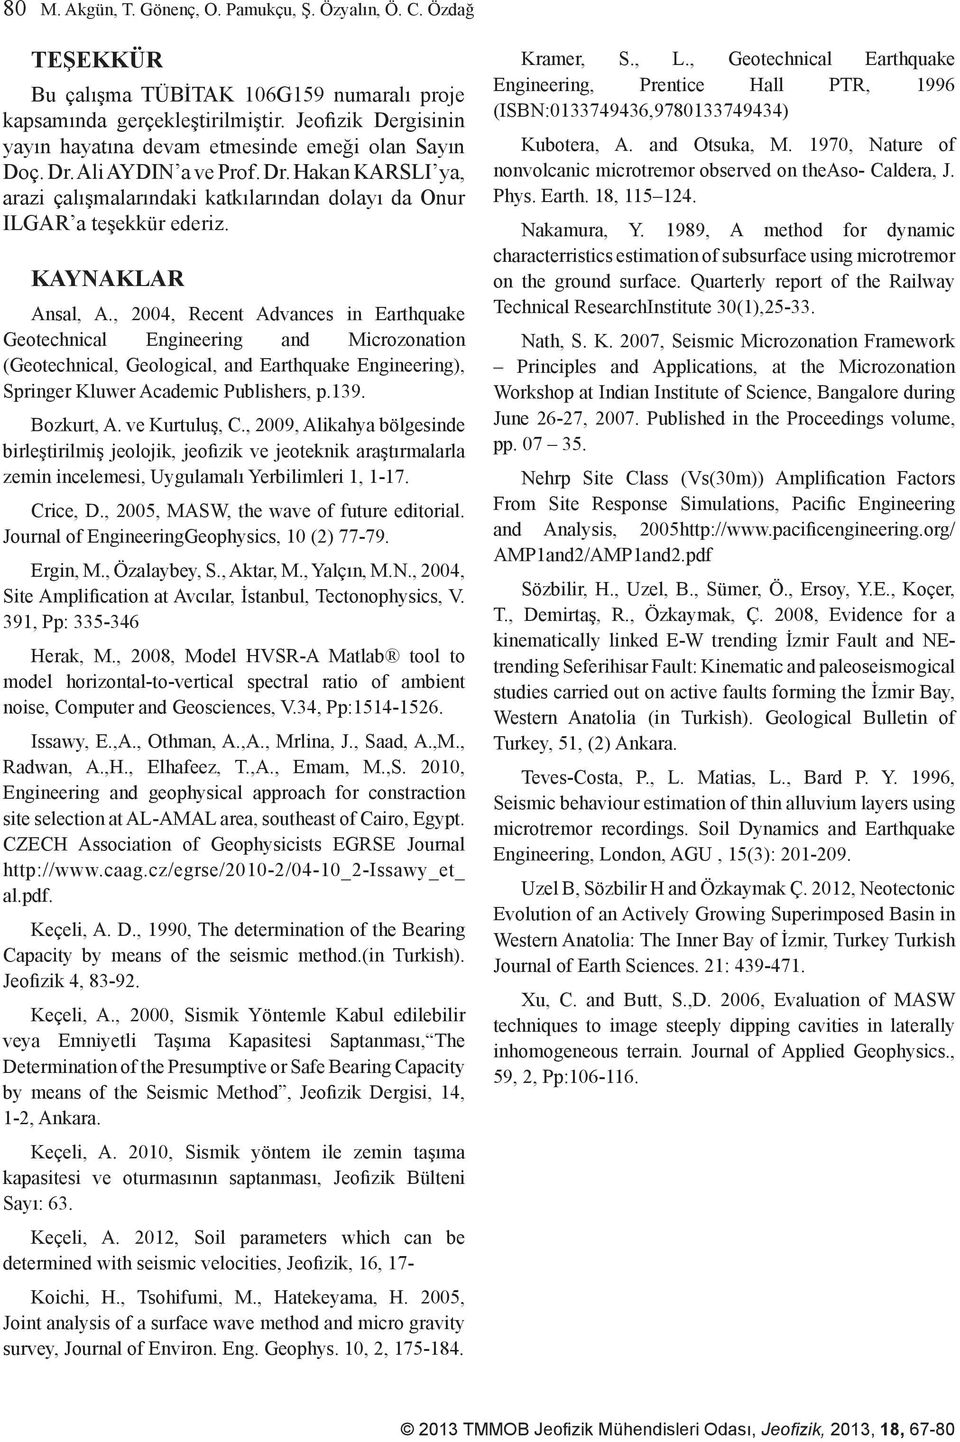 KAYNAKLAR Ansal, A., 2004, Recent Advances in Earthquake Geotechnical Engineering and Microzonation (Geotechnical, Geological, and Earthquake Engineering), Springer Kluwer Academic Publishers, p.139.